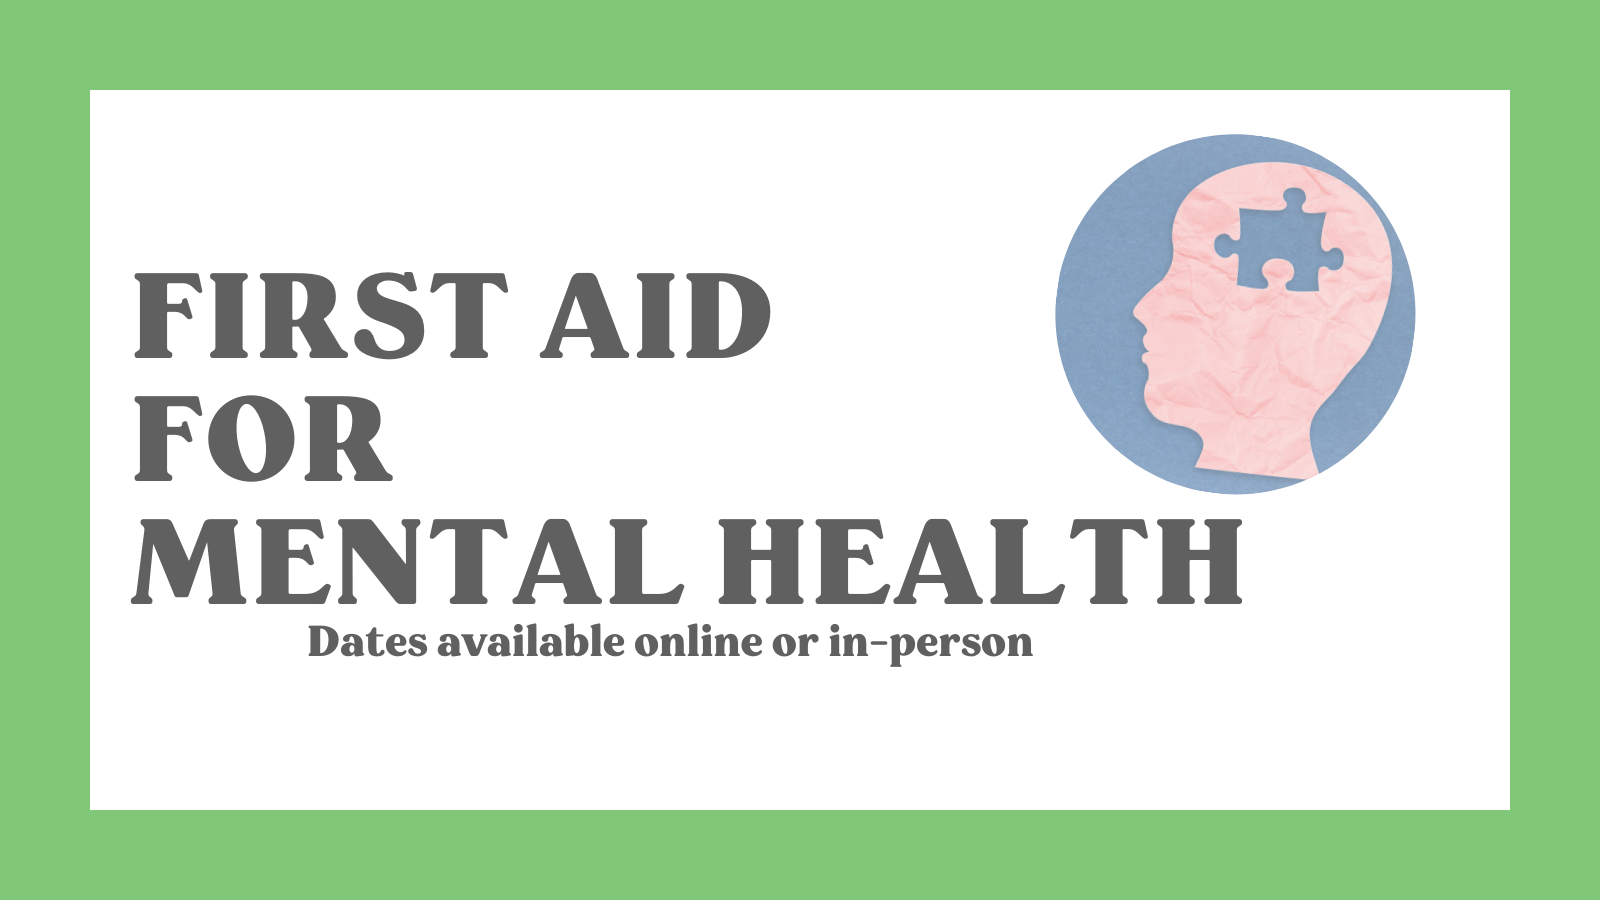 First Aid For Mental Health - Level 2